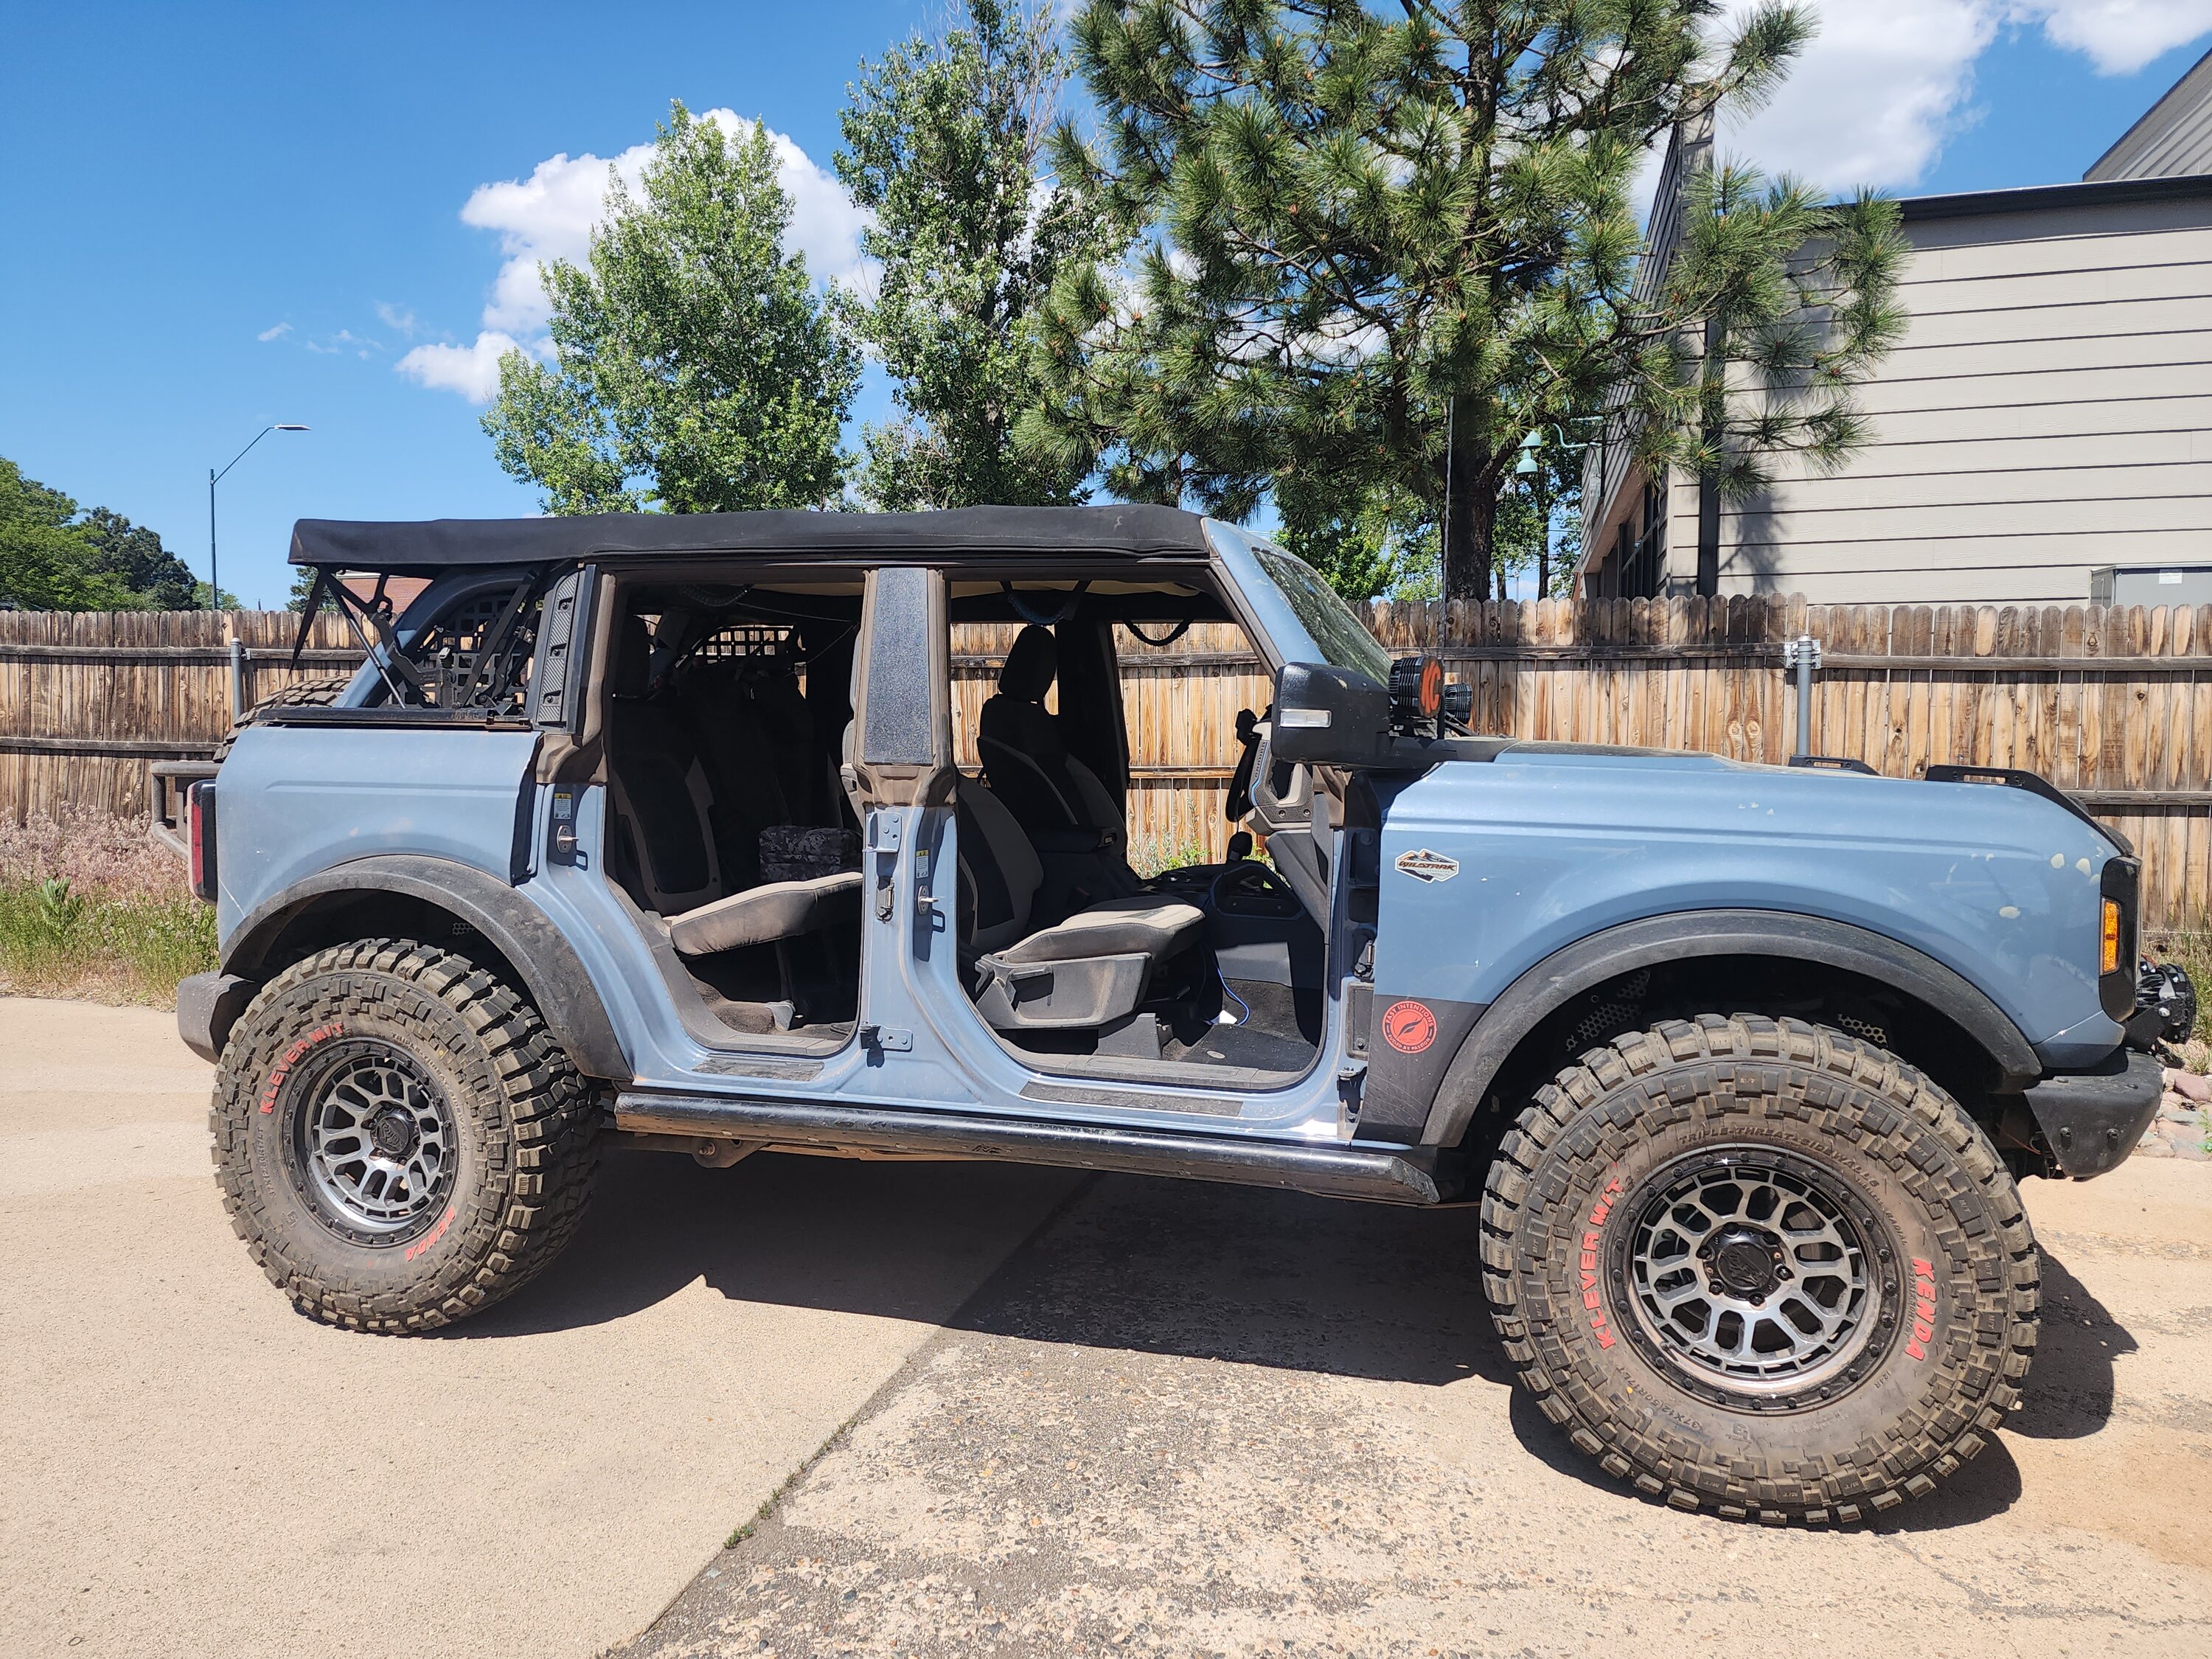 Ford Bronco Fully Naked thread! -- All Doors and Tops Off Pics 20230614_100812 (1)